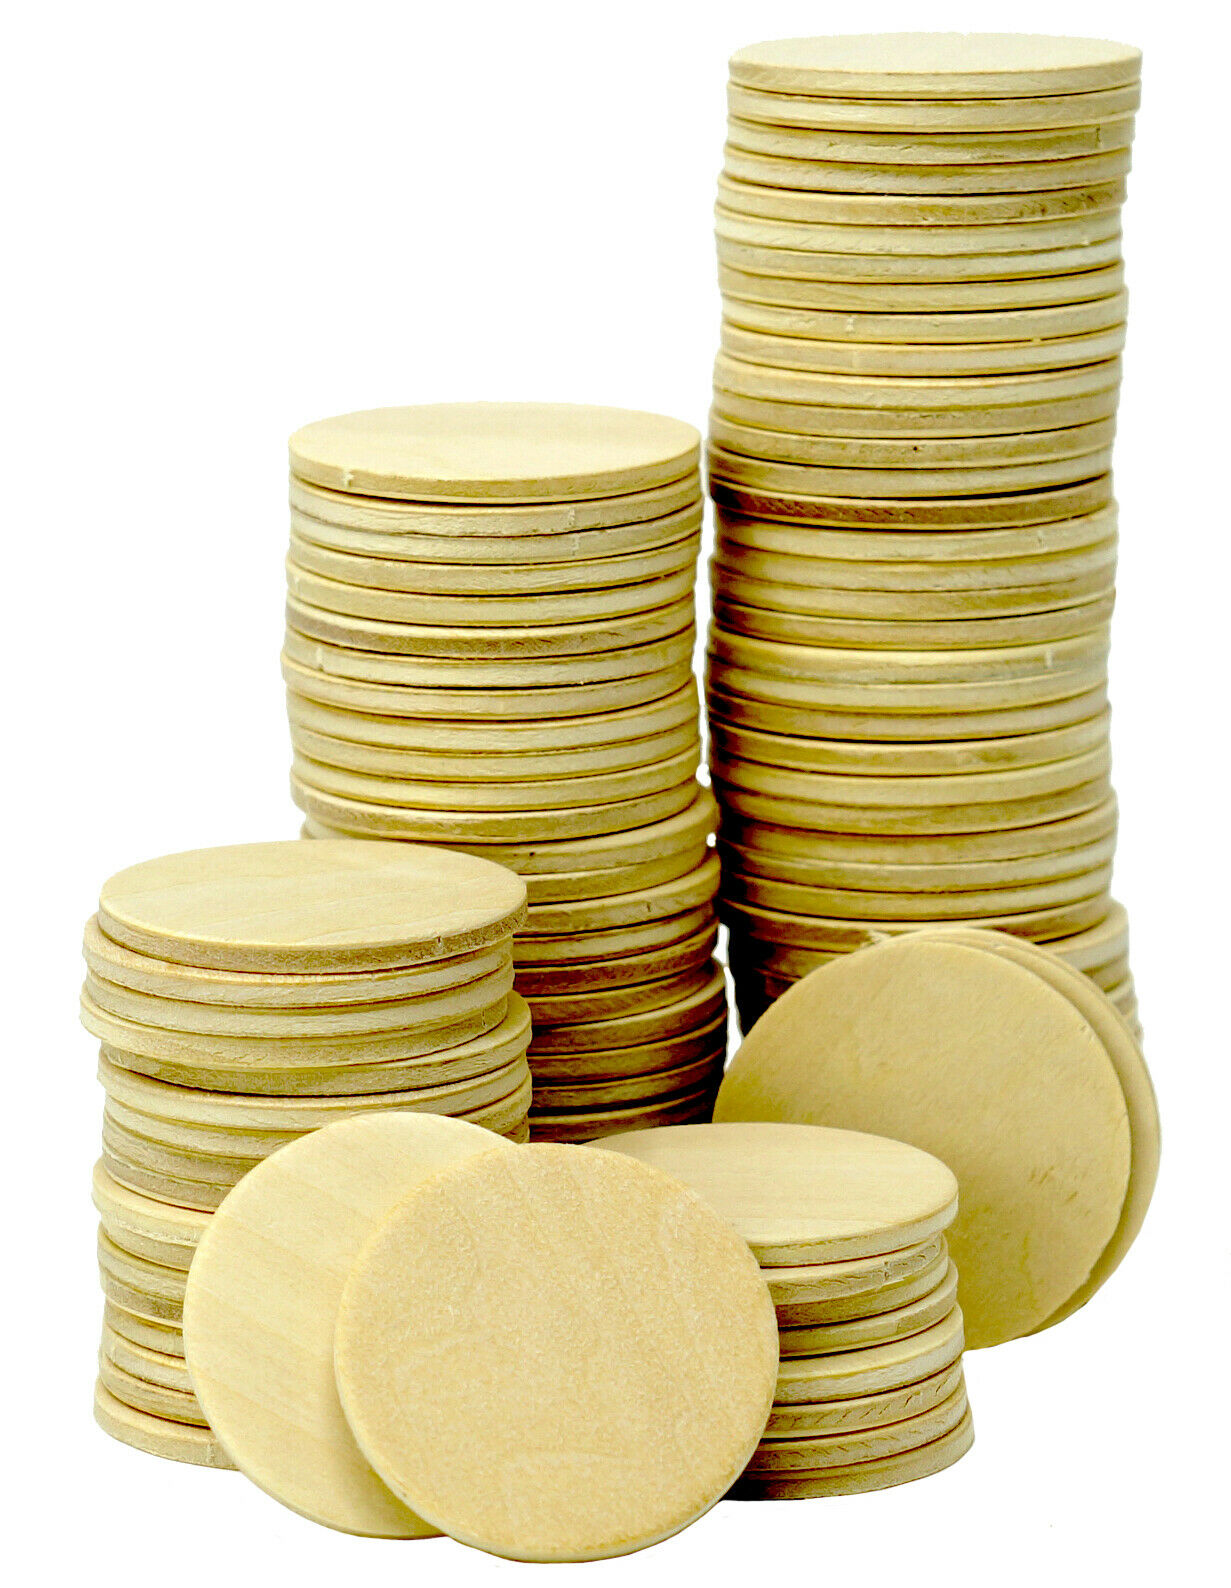 100 Round Unfinished 1.5" Wood Cutout Circles Chips For Crafts, Games, Ornaments